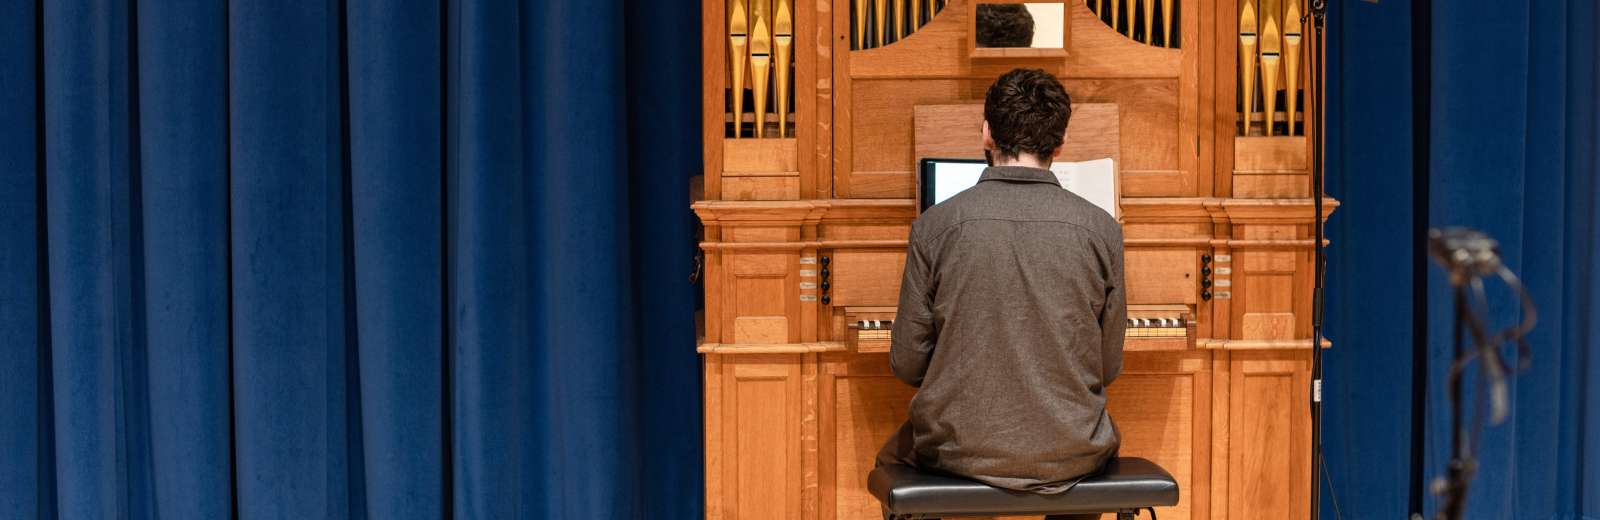 Postgraduate student in the School of Music. They are performing on the organ in the Concert Hall, their back is to the camera. Behind the organ is a royal blue velvet curtain.